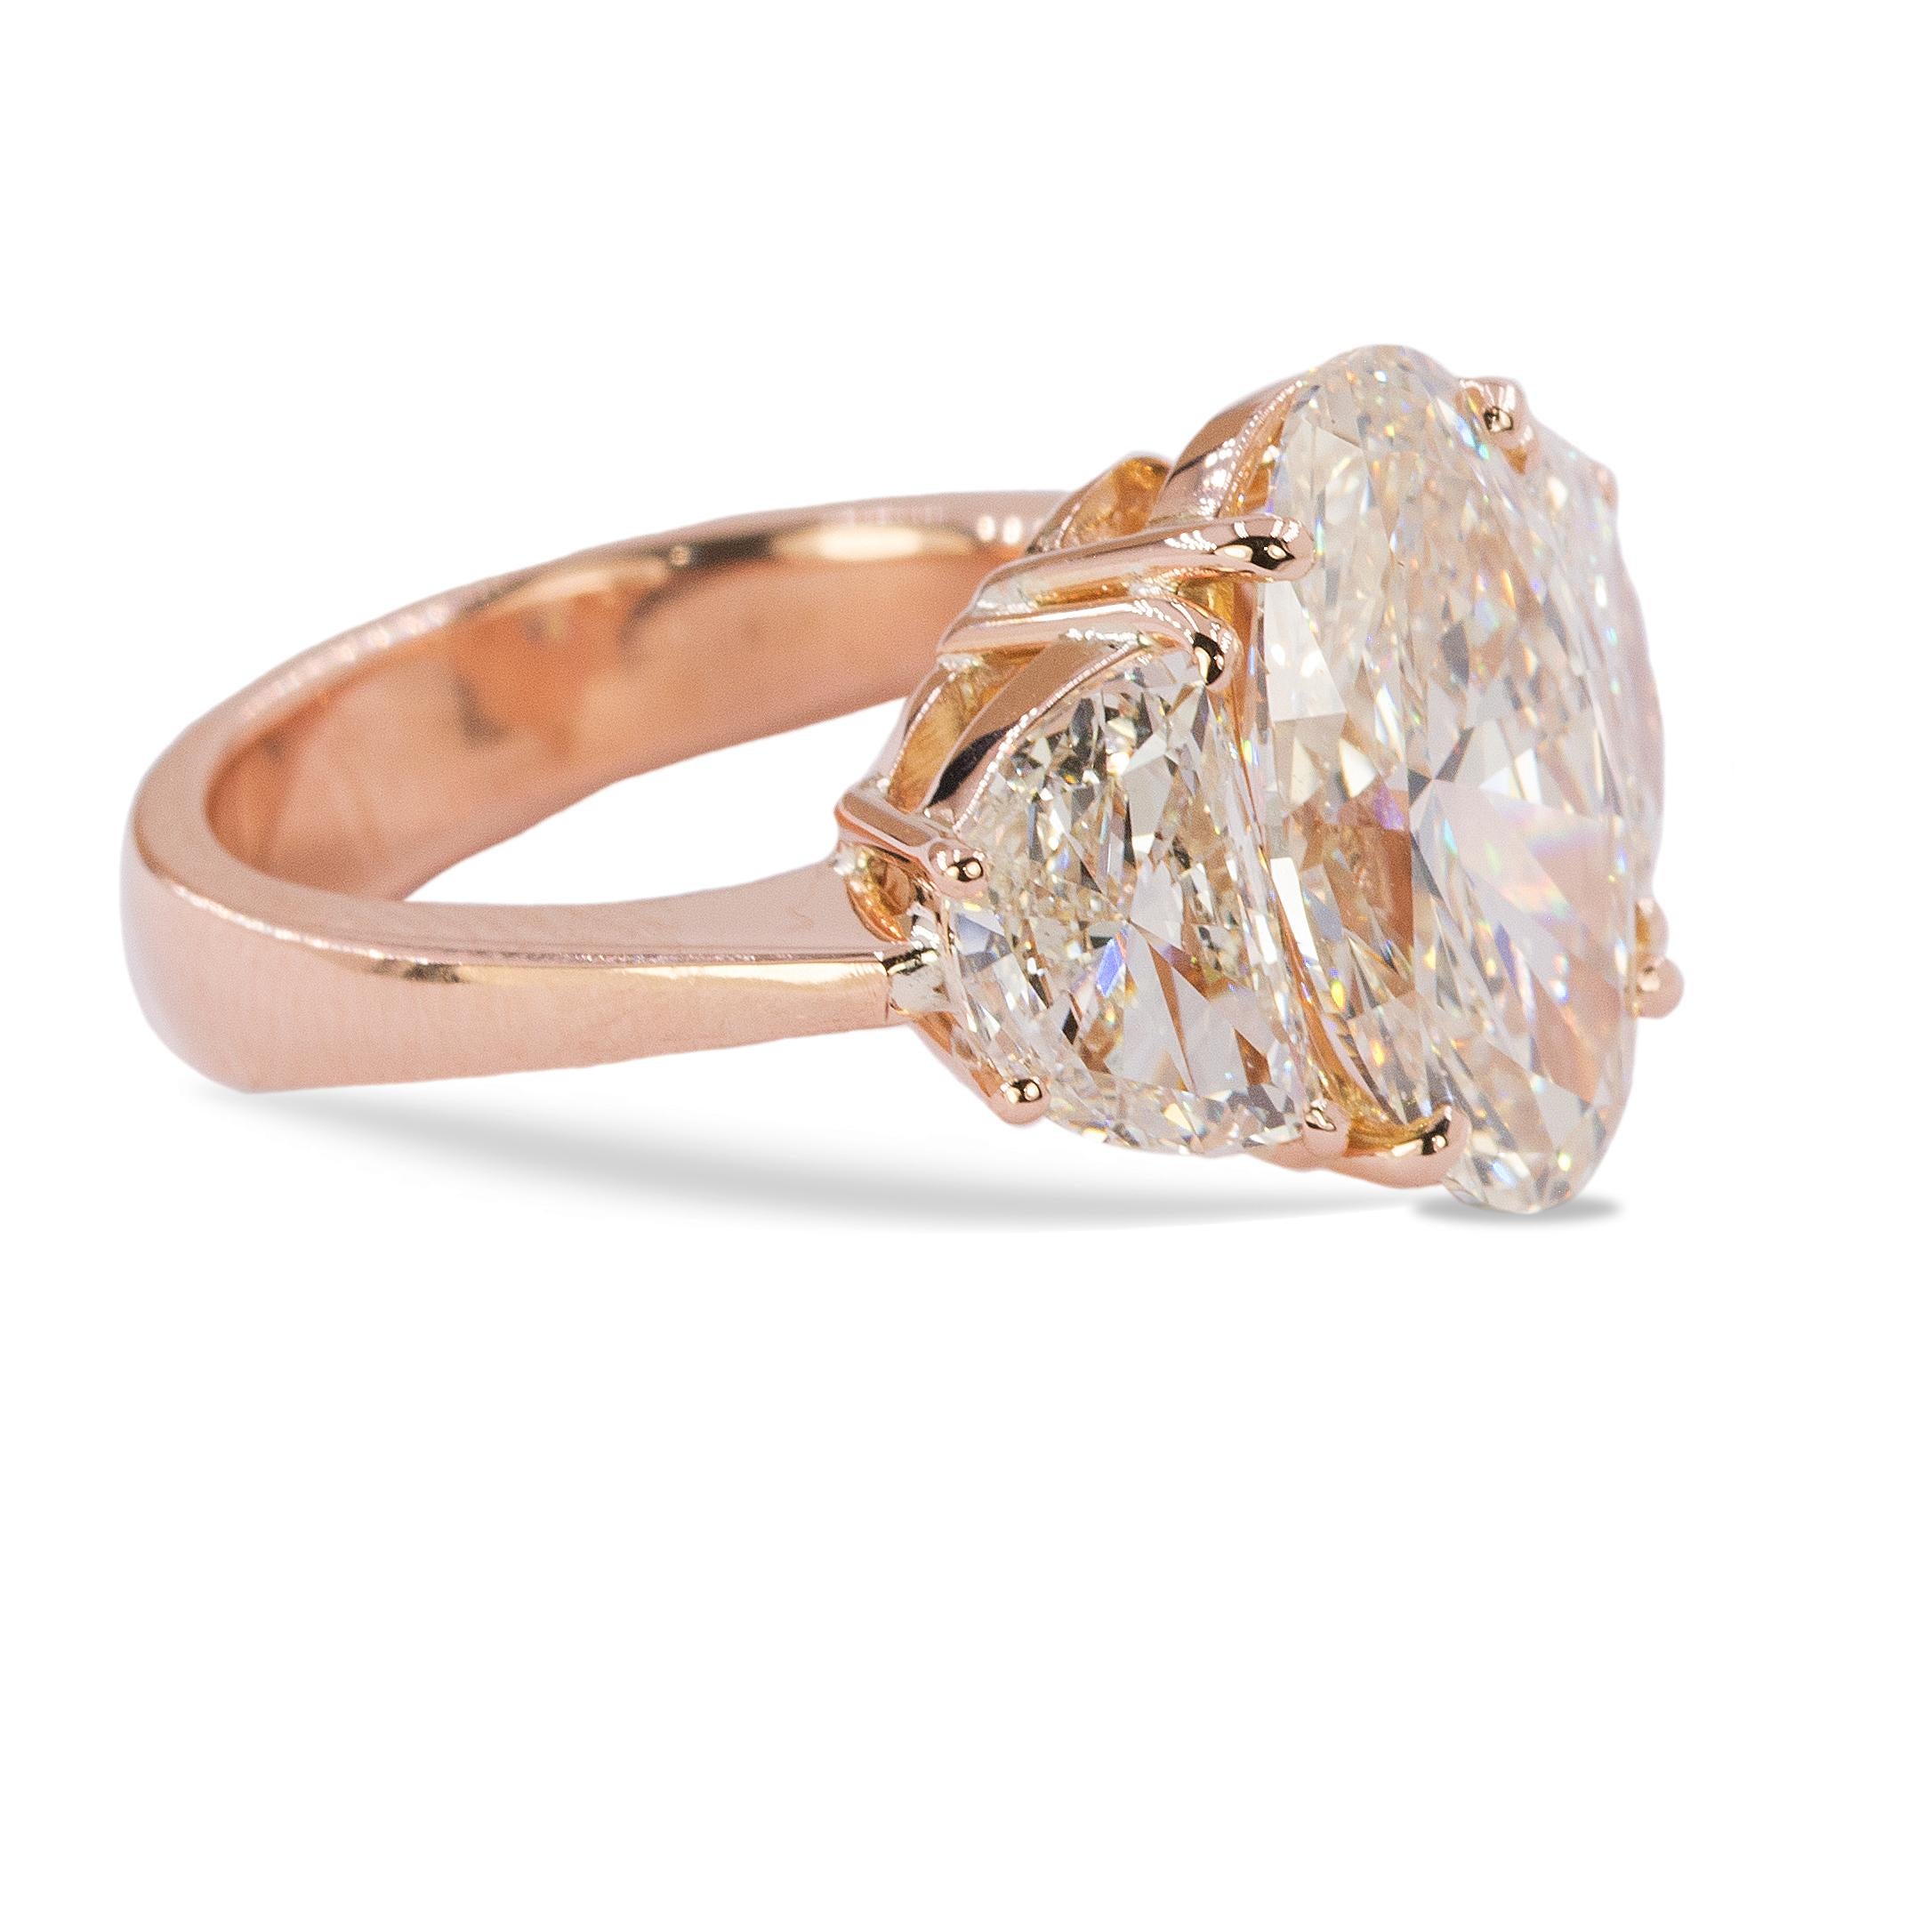 18k Rose gold ring with GIA certified 4.72 carat, K color, VS2 clarity oval brilliant diamond and 2 J color VS1-SI1 clarity half moon cut diamonds weighing 2.01 carats.